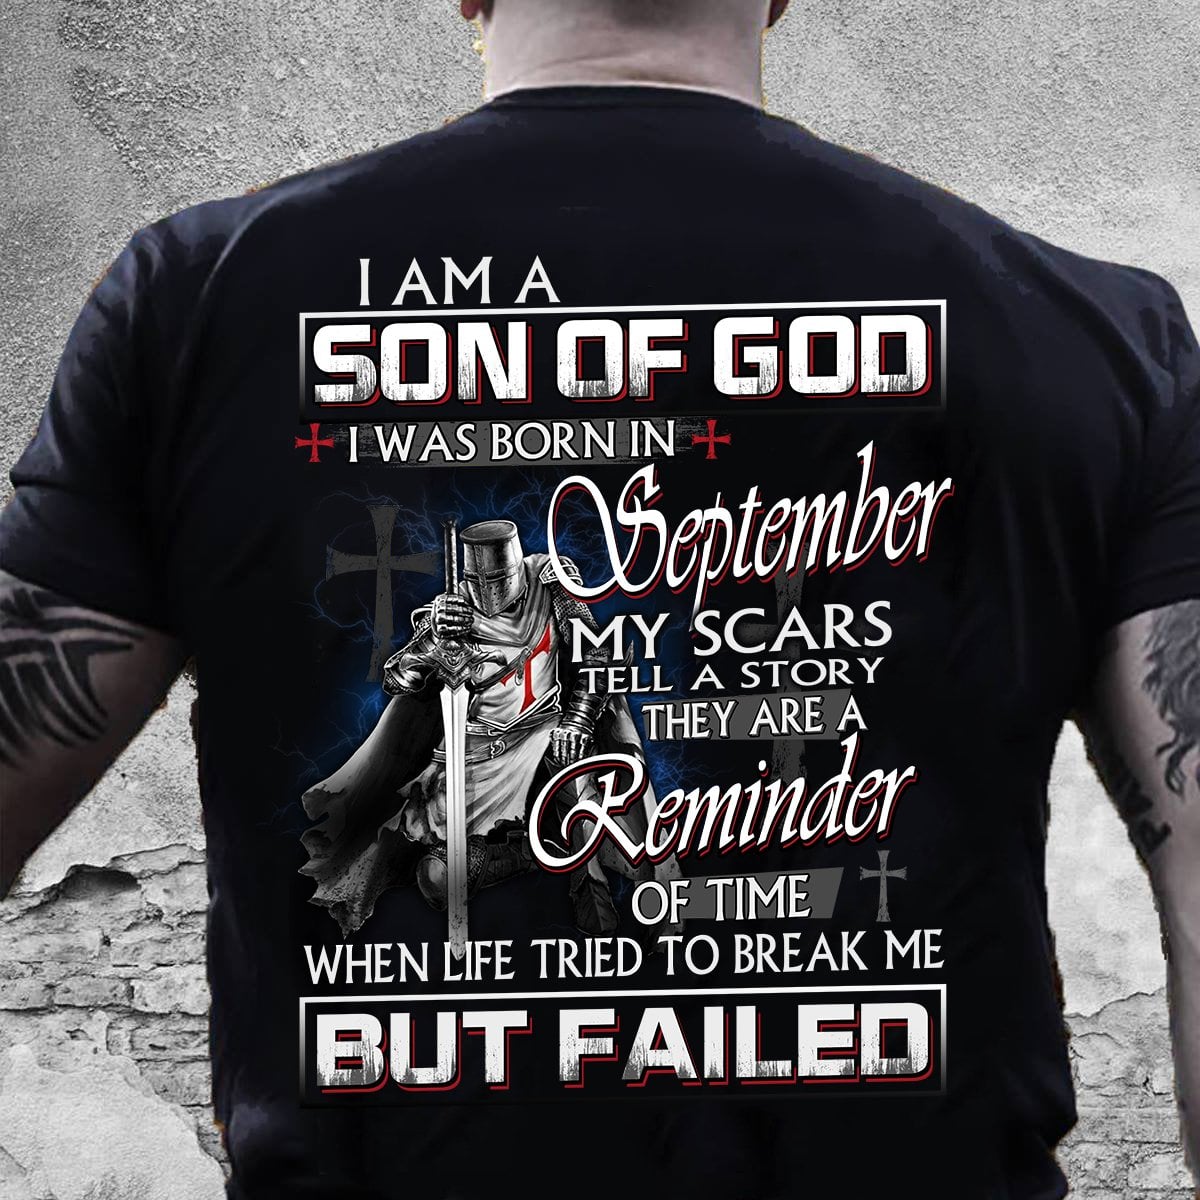 I am a son of god I was born in September - God's knight